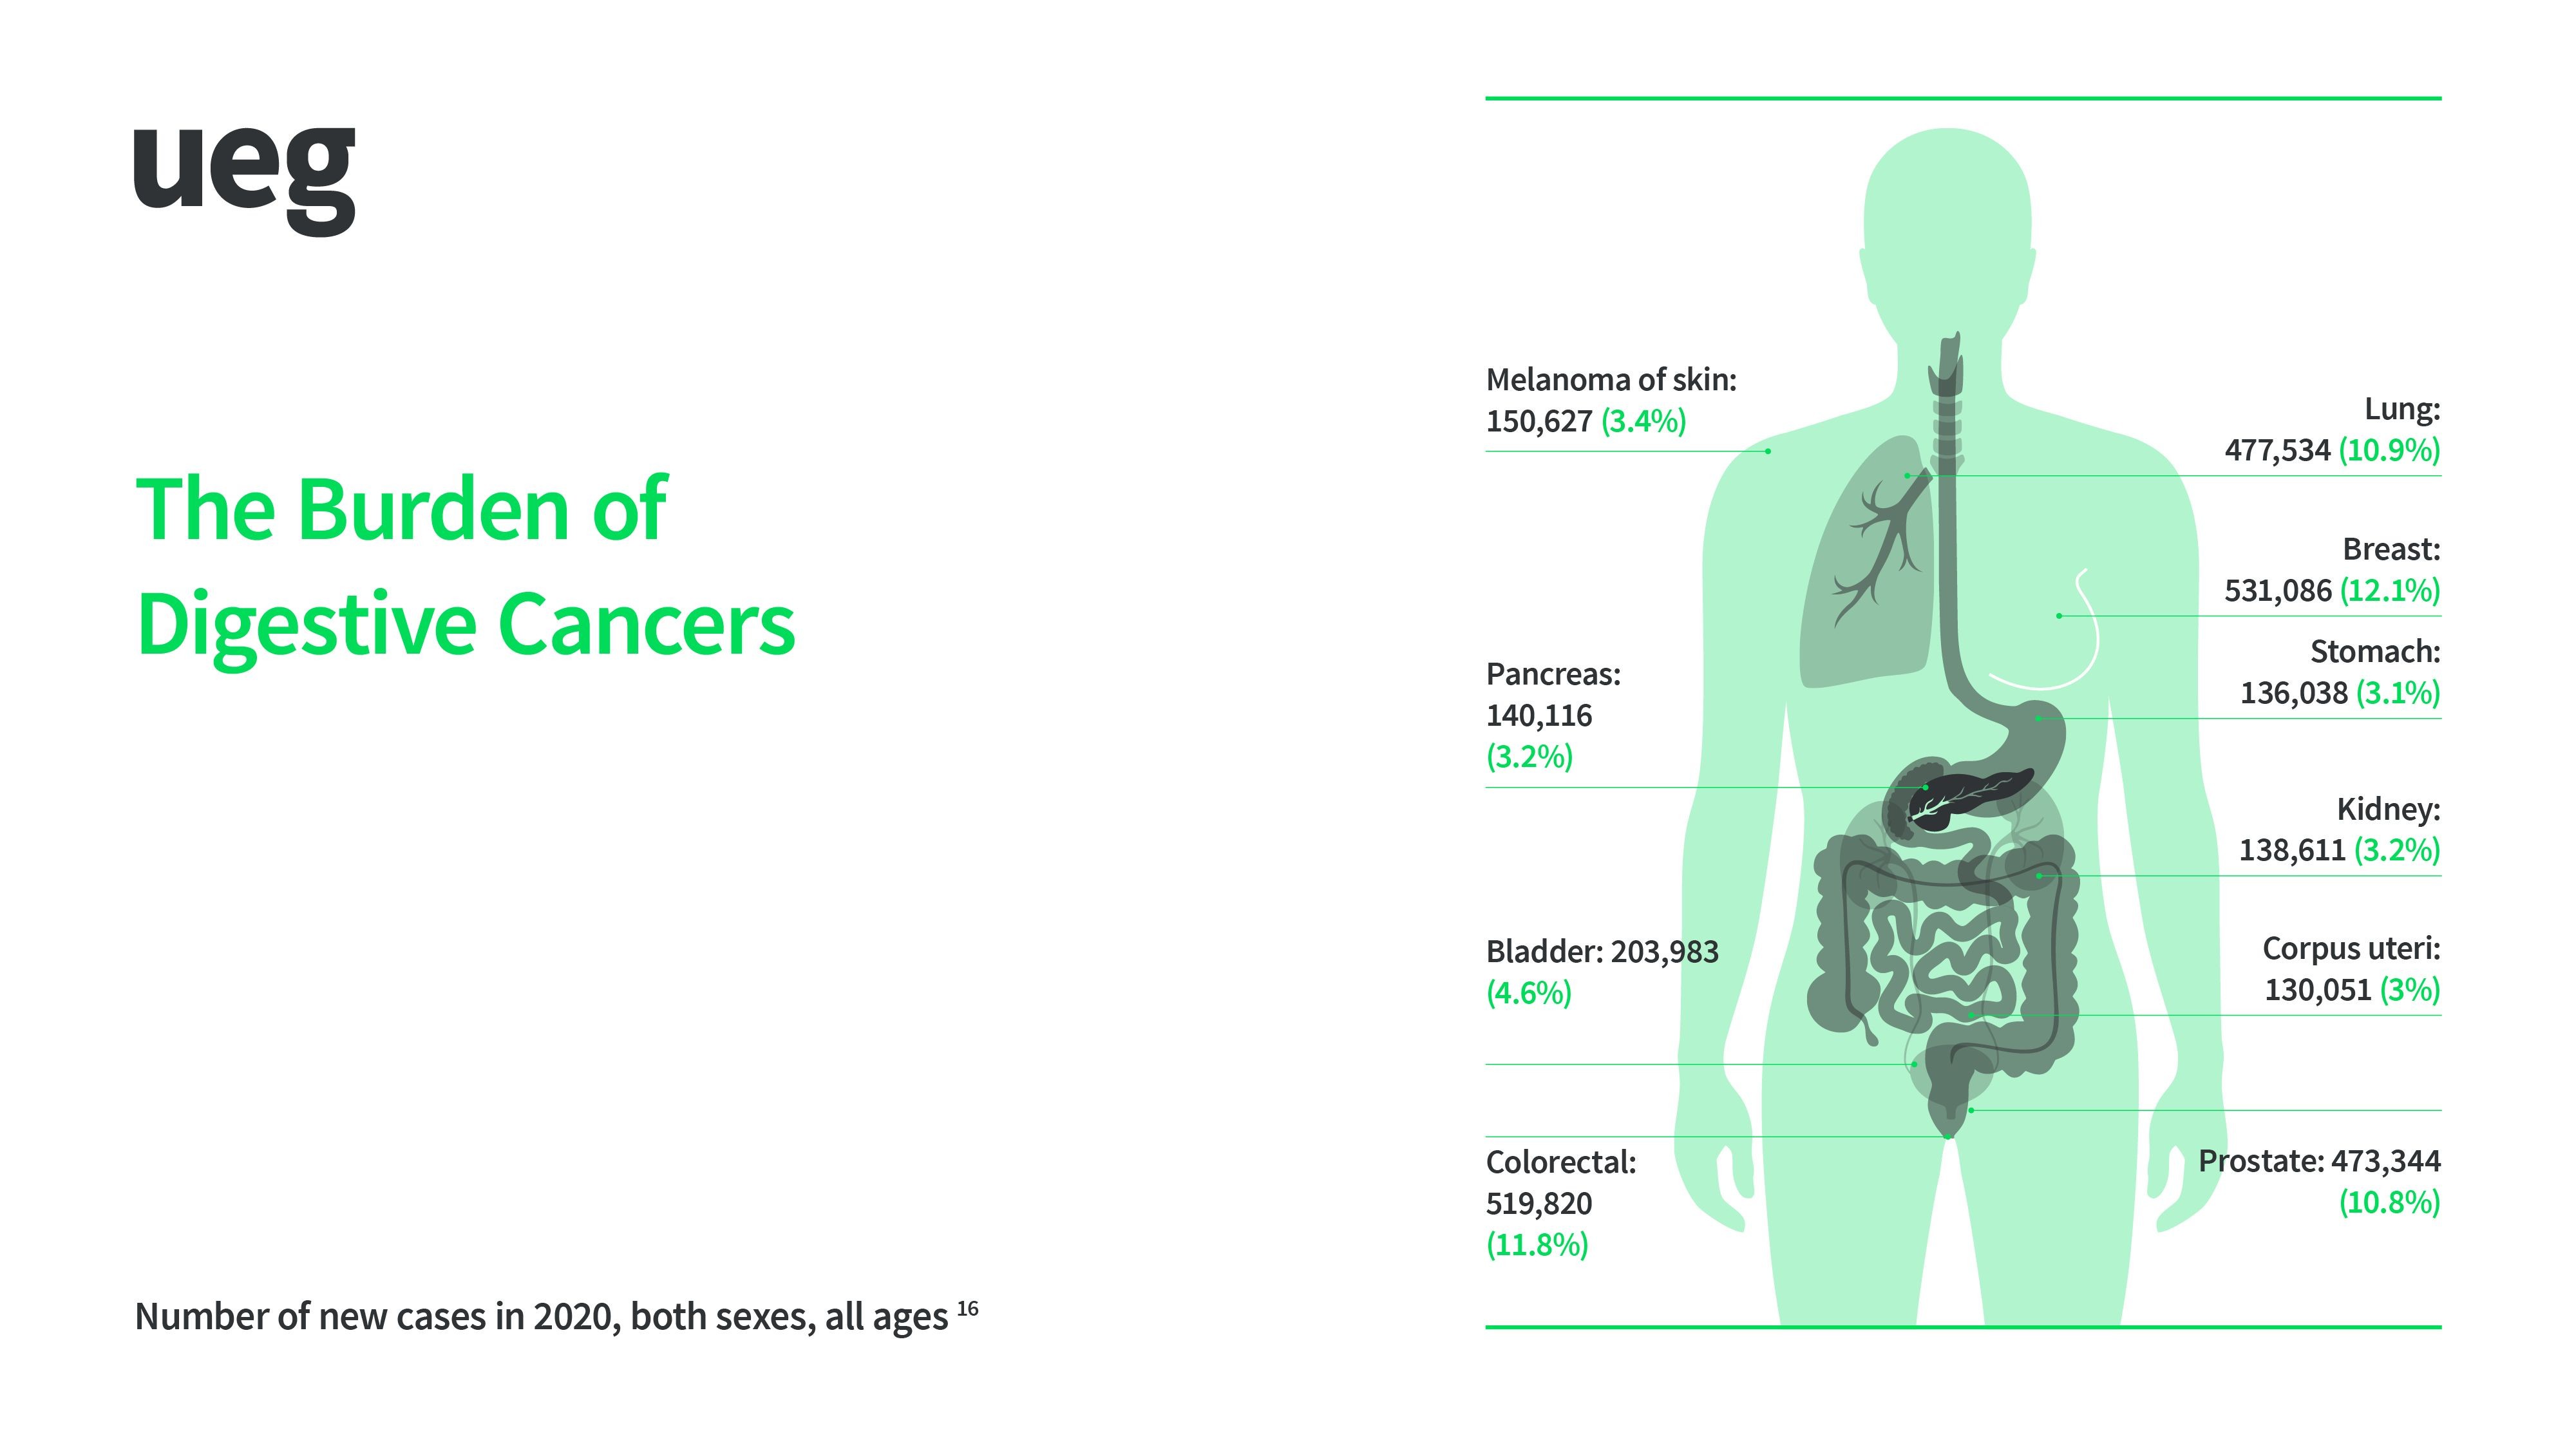 The burden of digestive cancers